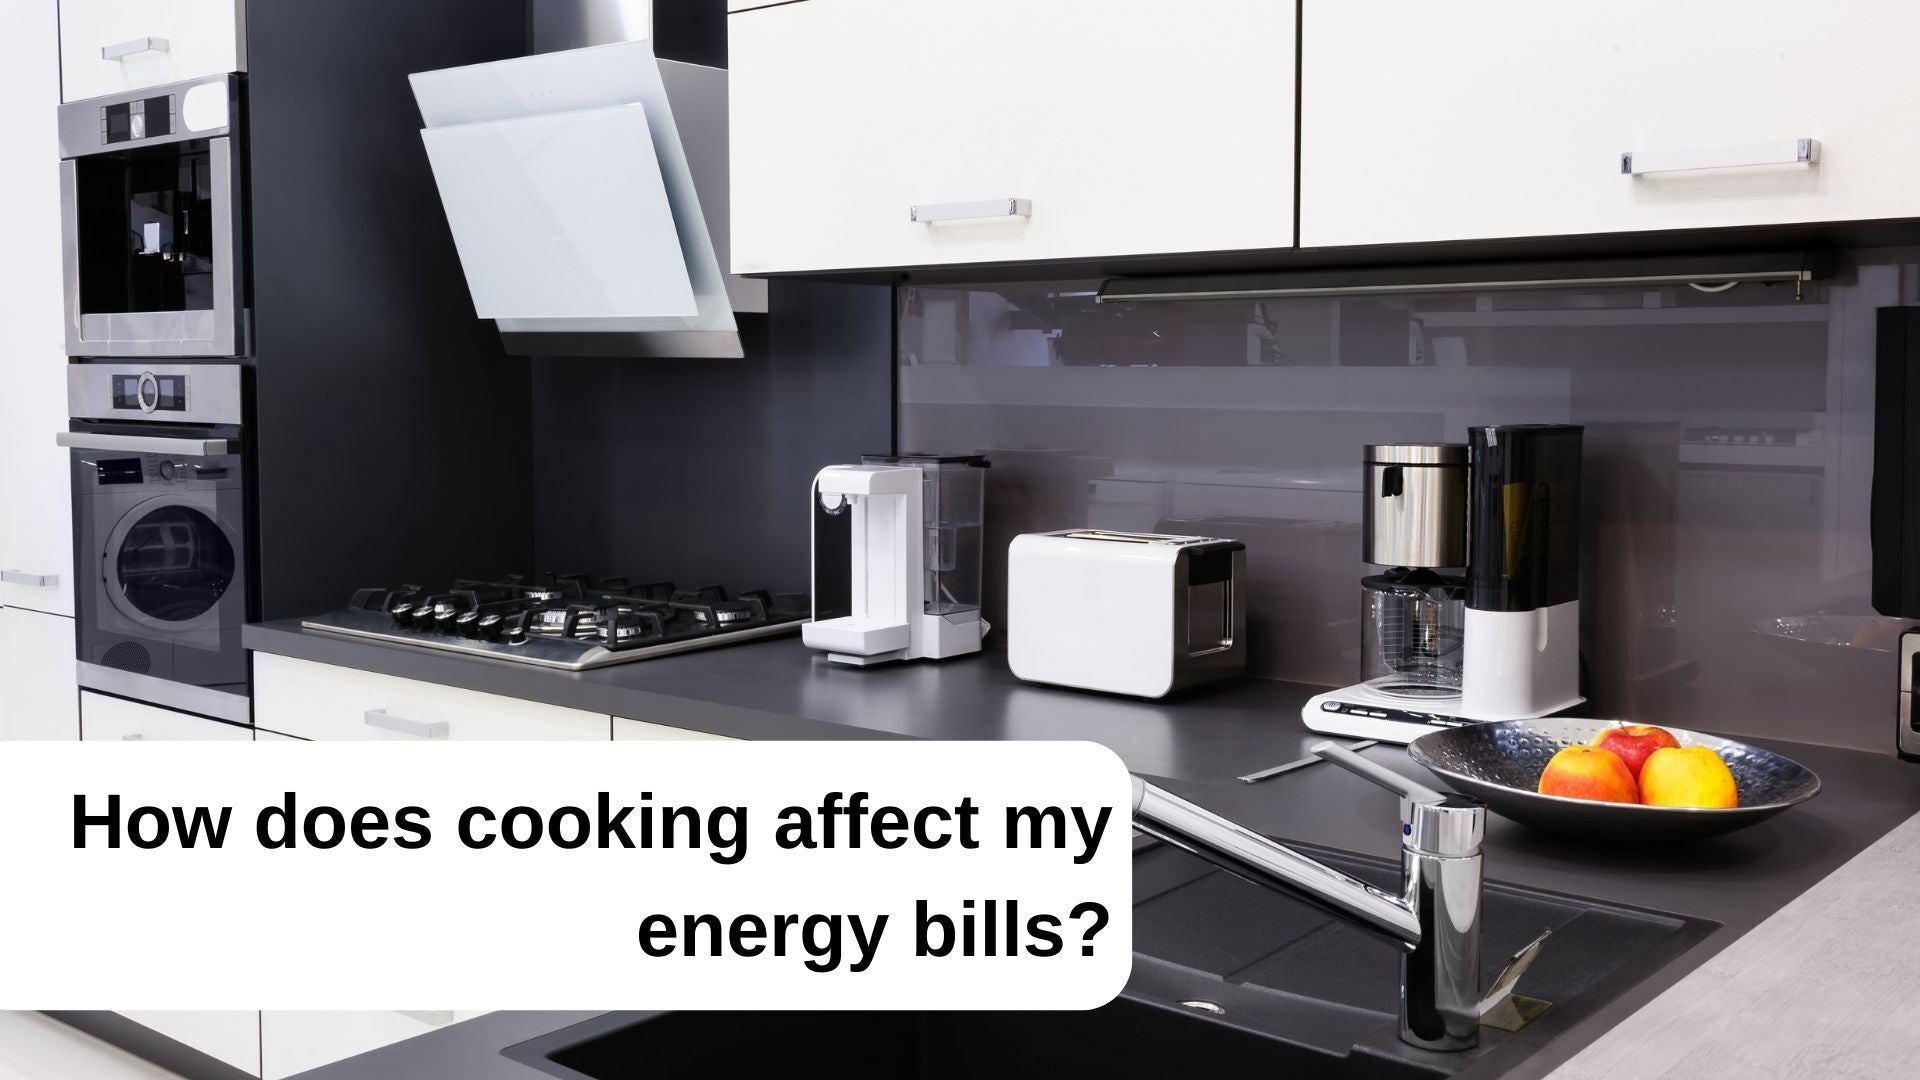 How Much Electricity Does a Stove Use?